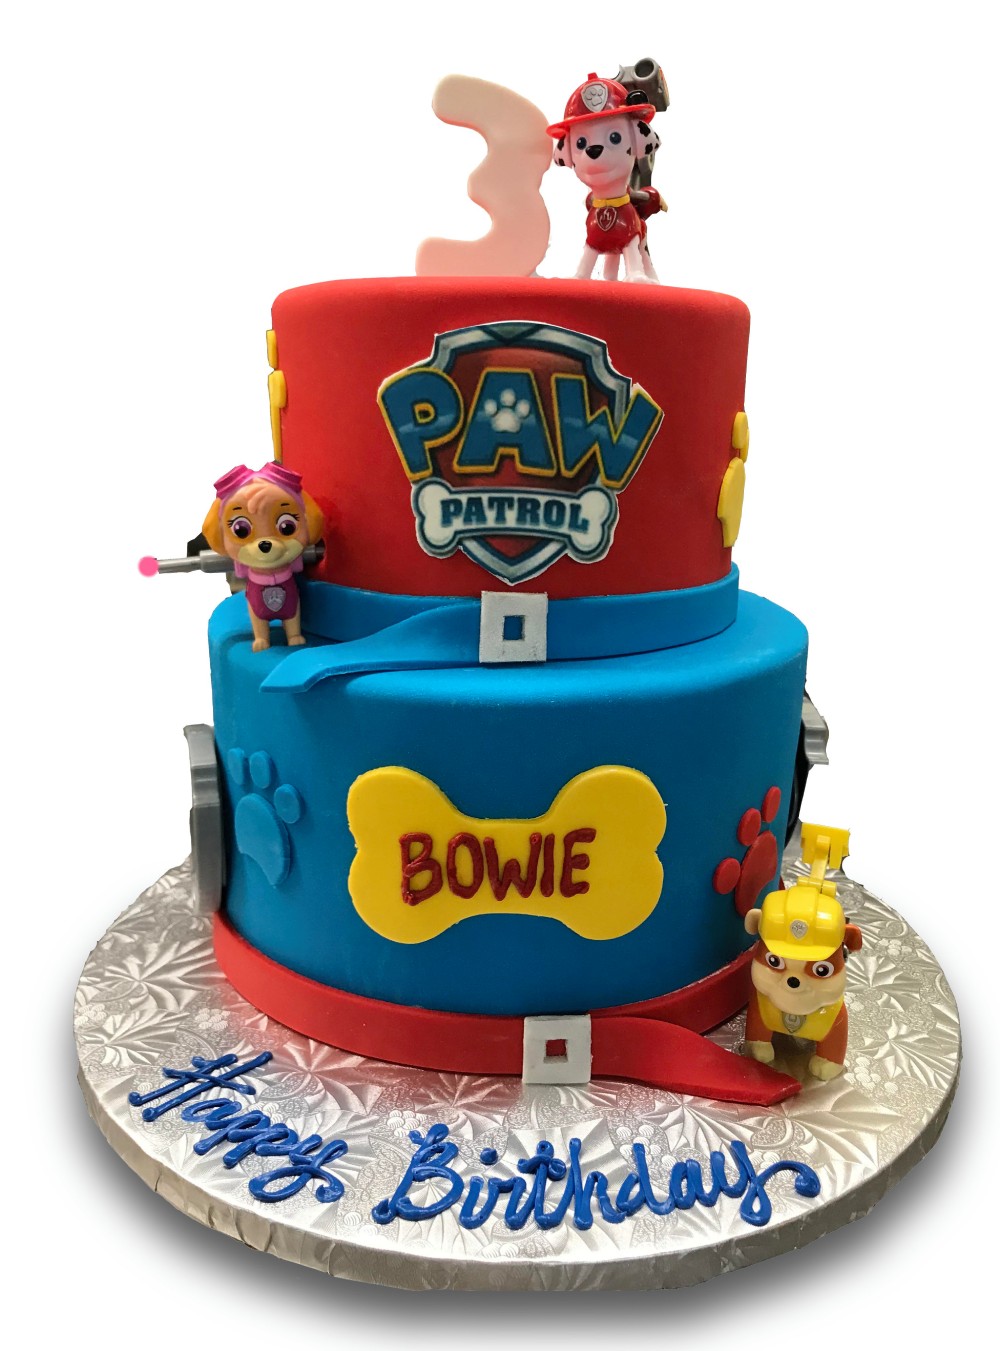 Two tiered fondant covered paw patrol theme cake